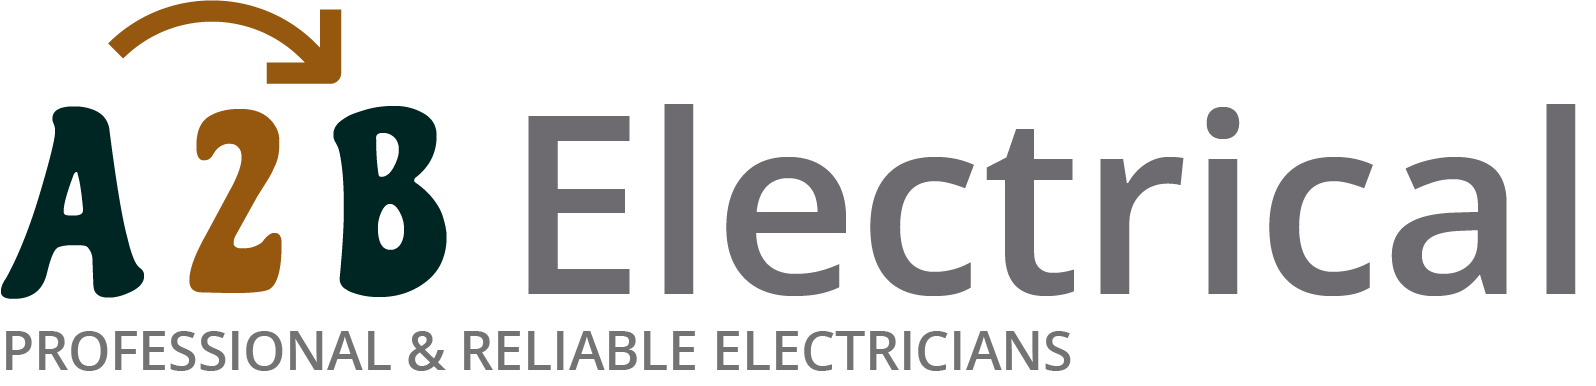 If you have electrical wiring problems in Cottingham, we can provide an electrician to have a look for you. 